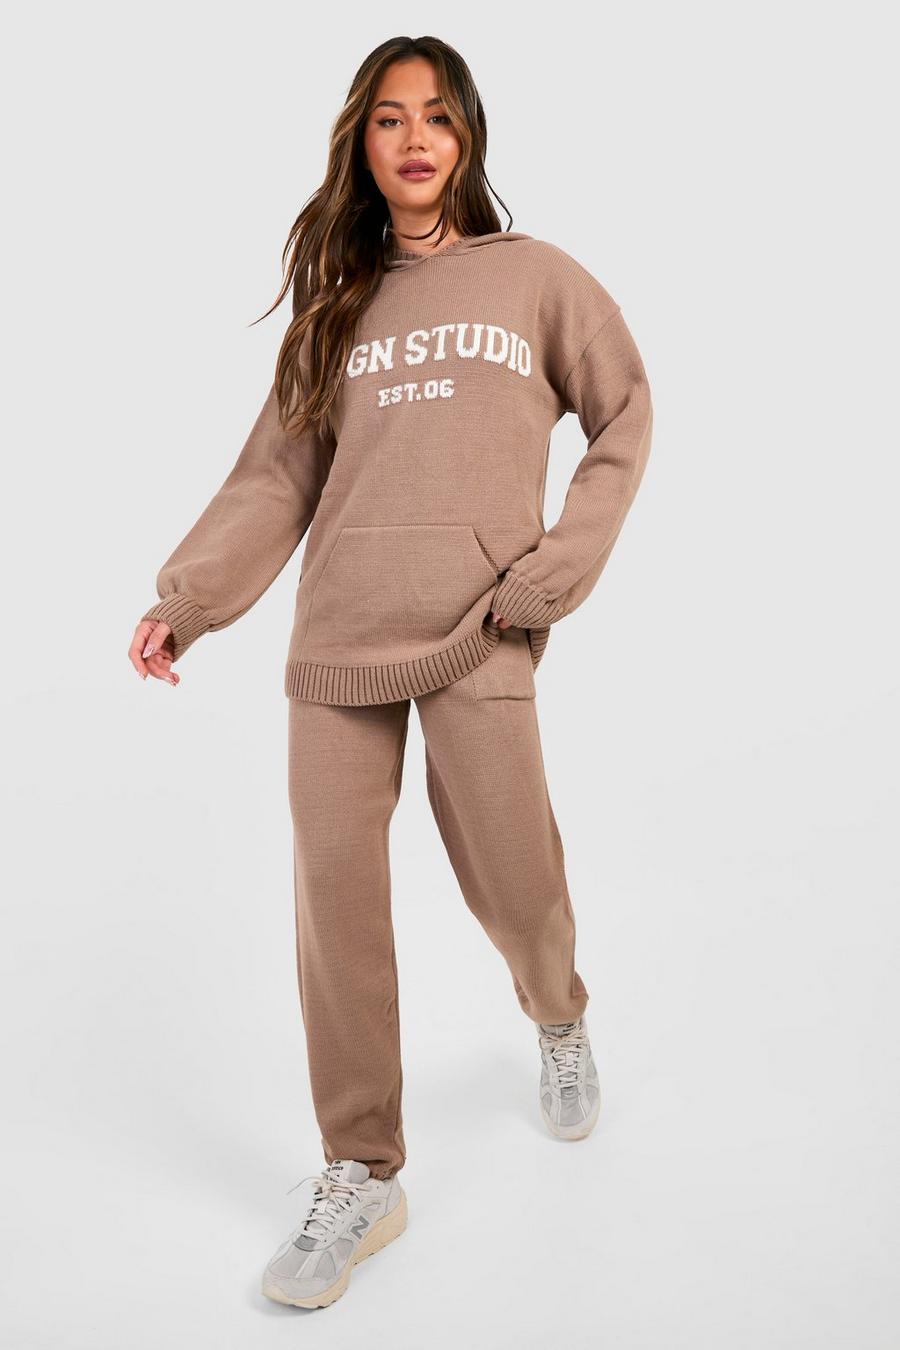 Taupe Dsgn Studio Oversized Hoody And Track Pants Set